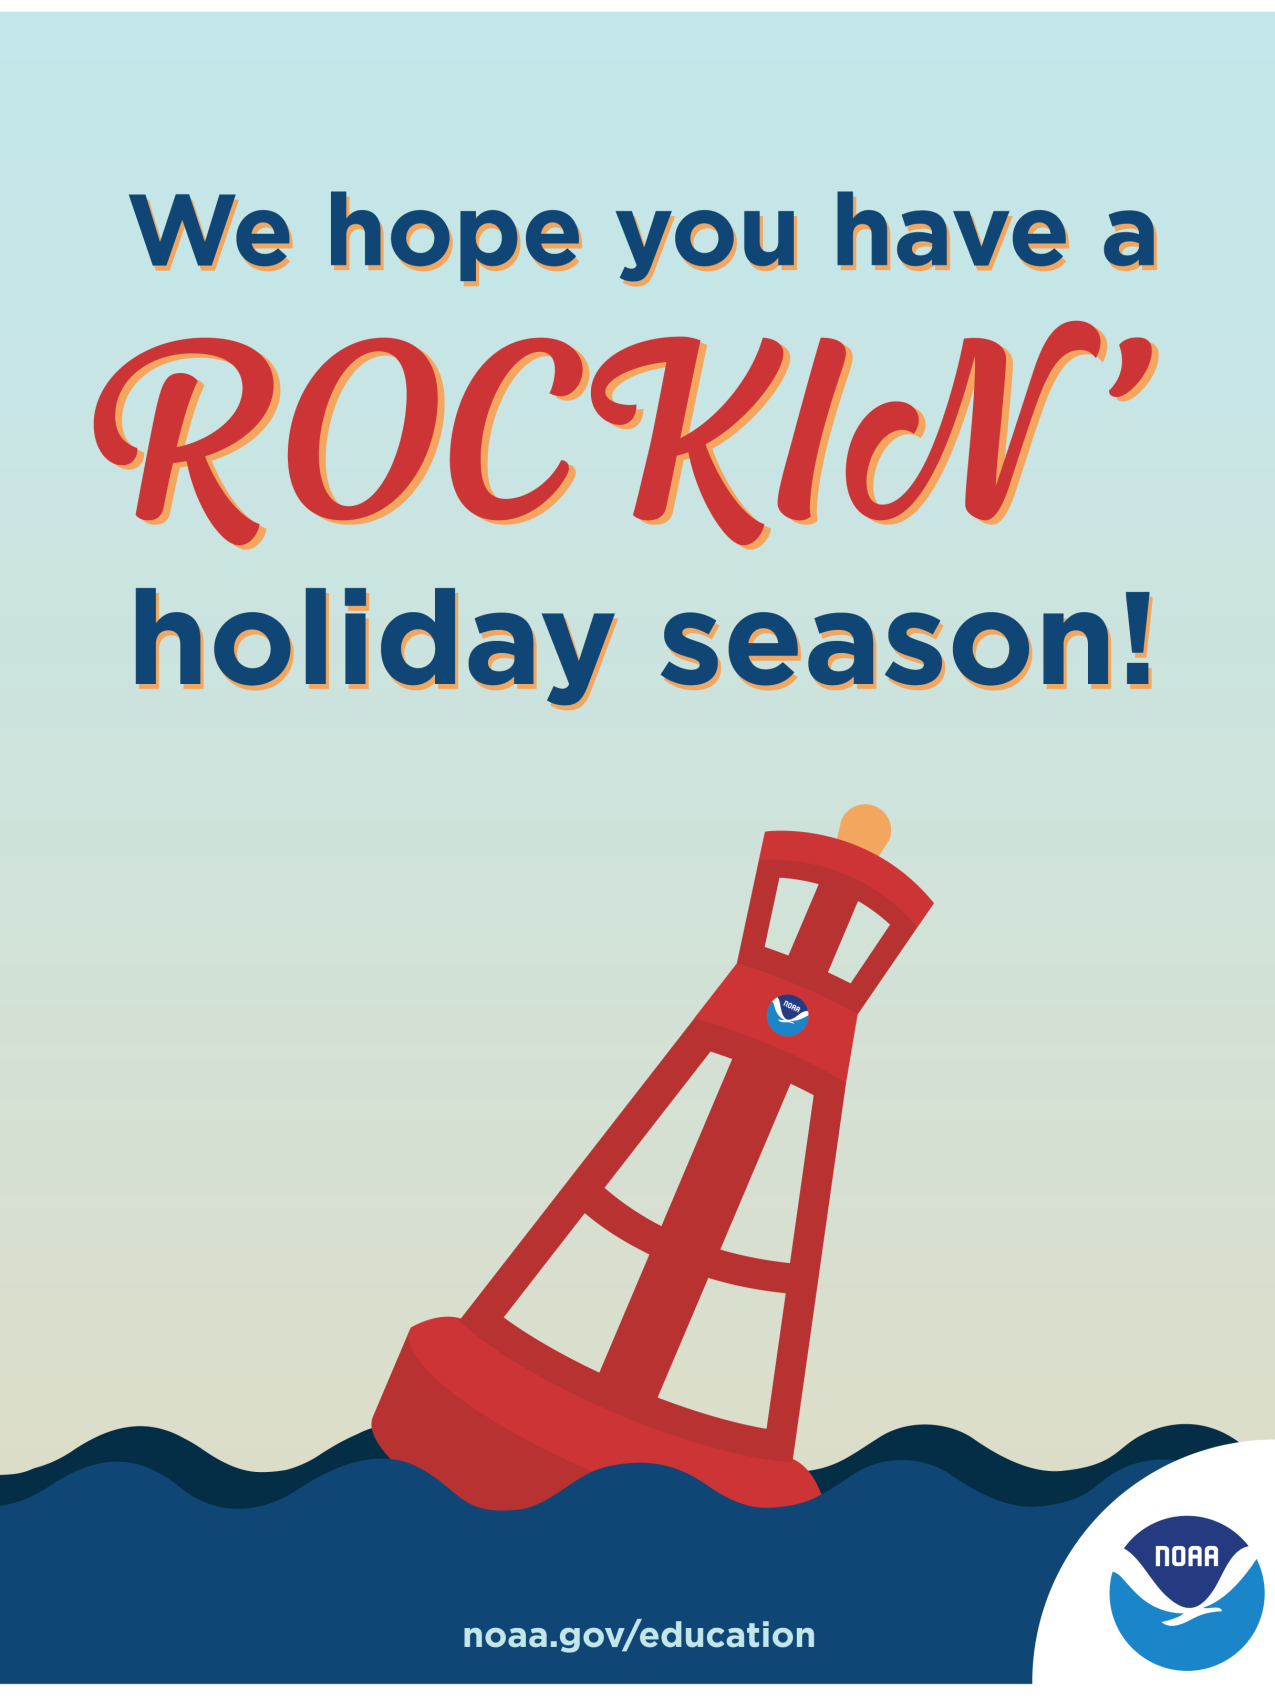 An illustrated holiday card featuring an ocean buoy with a NOAA logo on it floating lopsided as if rocking in choppy waters. There is a NOAA logo in the corner of the card. Text: We hope you have a rockin’ holiday season! noaa.gov/education 